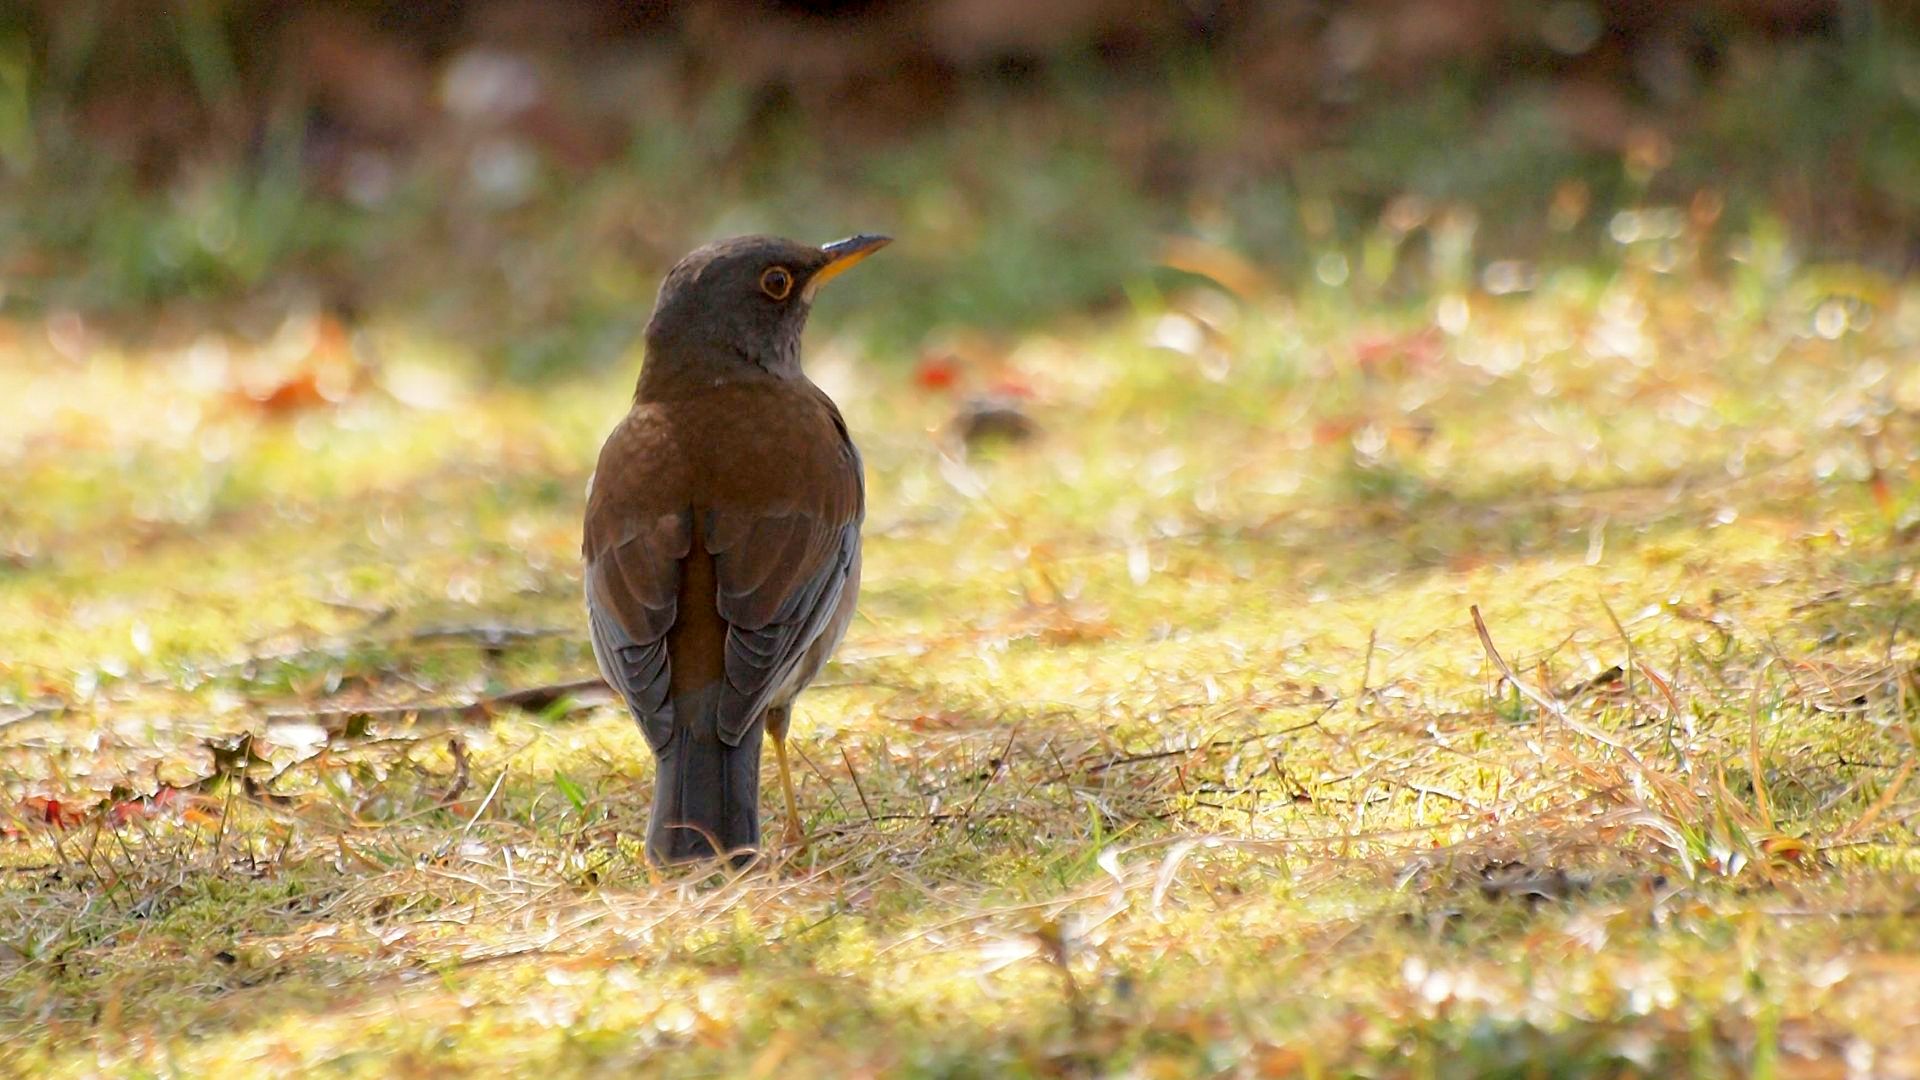 A pale thrush seen from behind